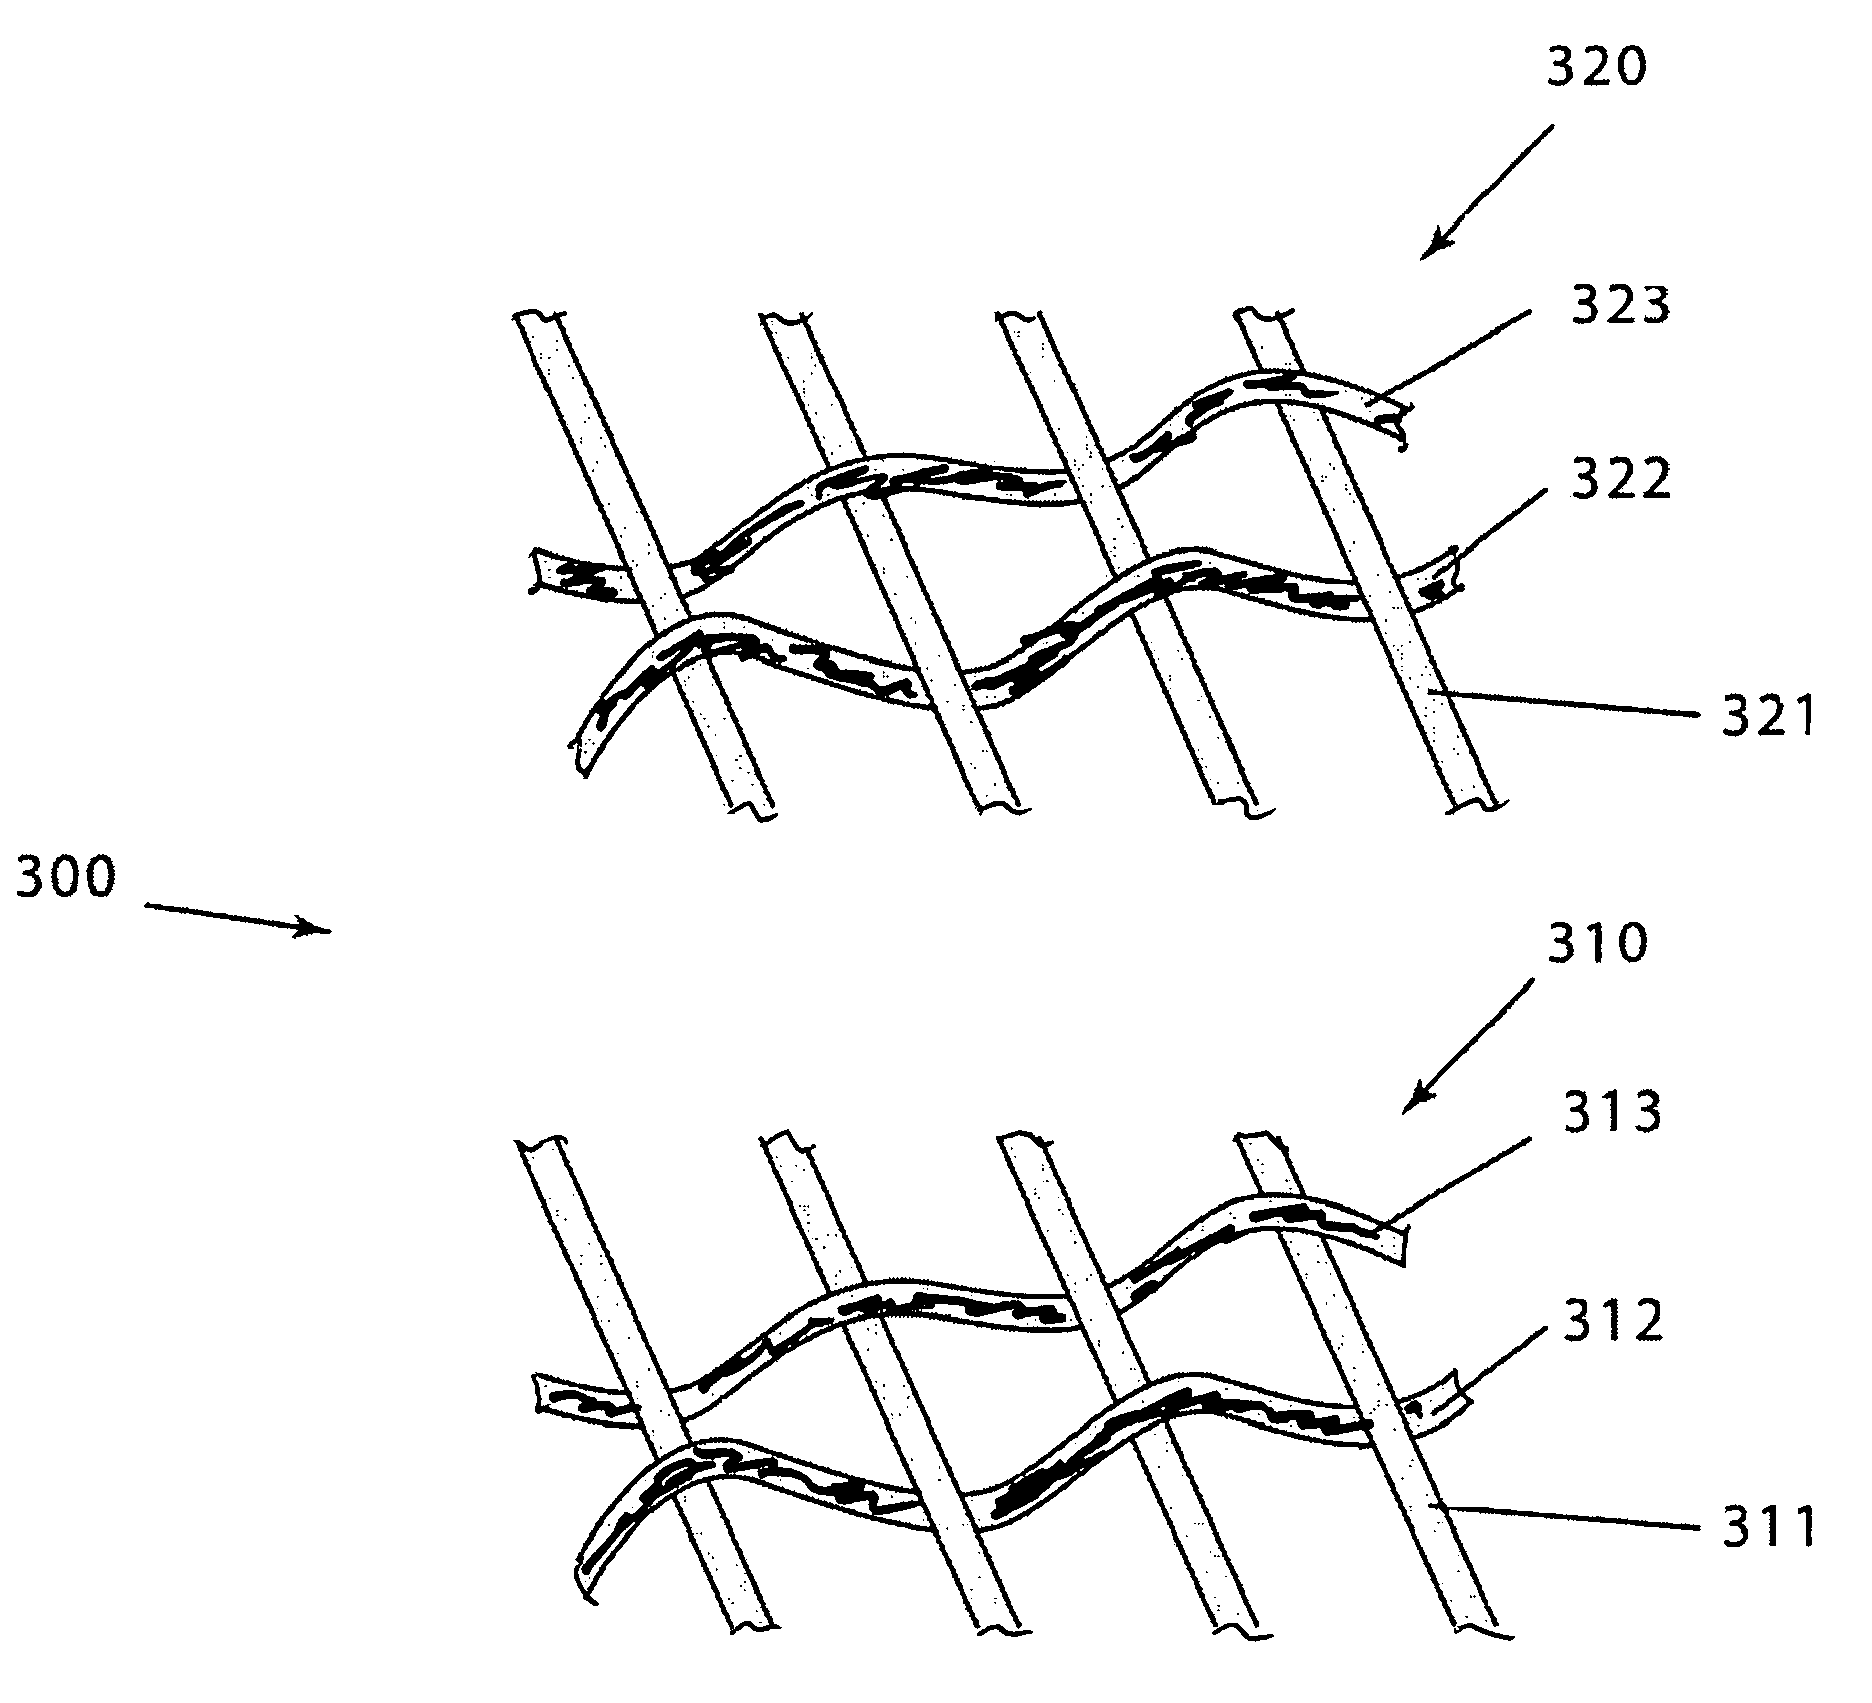 Two-layer drum cover made of a metal alloy in the warp directions and a plurality of metal alloys in the shute directions on both front and back surfaces